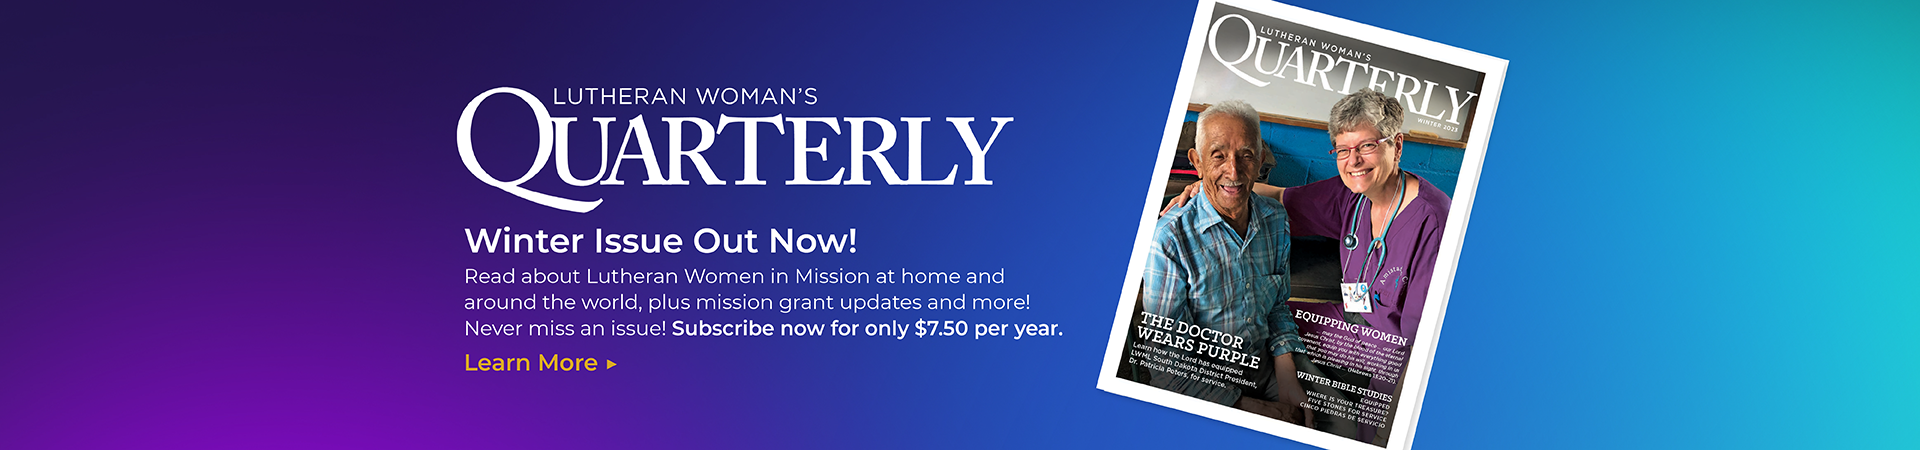 Winter Lutheran Woman's Quarterly now out! Read about Lutheran Women in Mission at home and around the world, plus mission grant updates and more! Never miss an issue! Subscribe now for only $7.50 a year. Learn More.